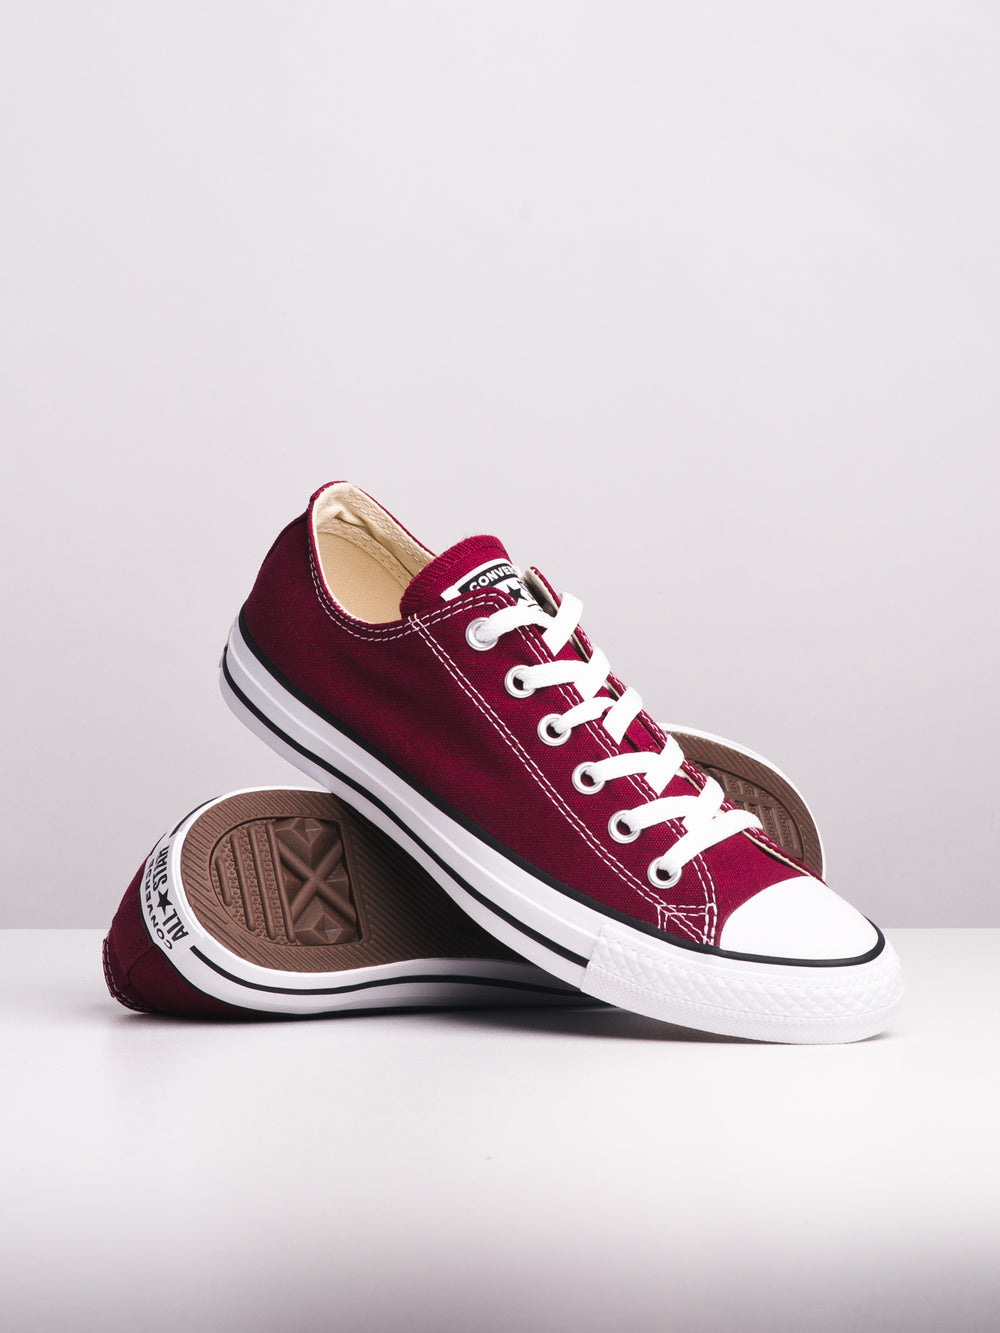 CHAUSSURES CHUCK TAYLOR ALL STAR OX POUR FEMMES